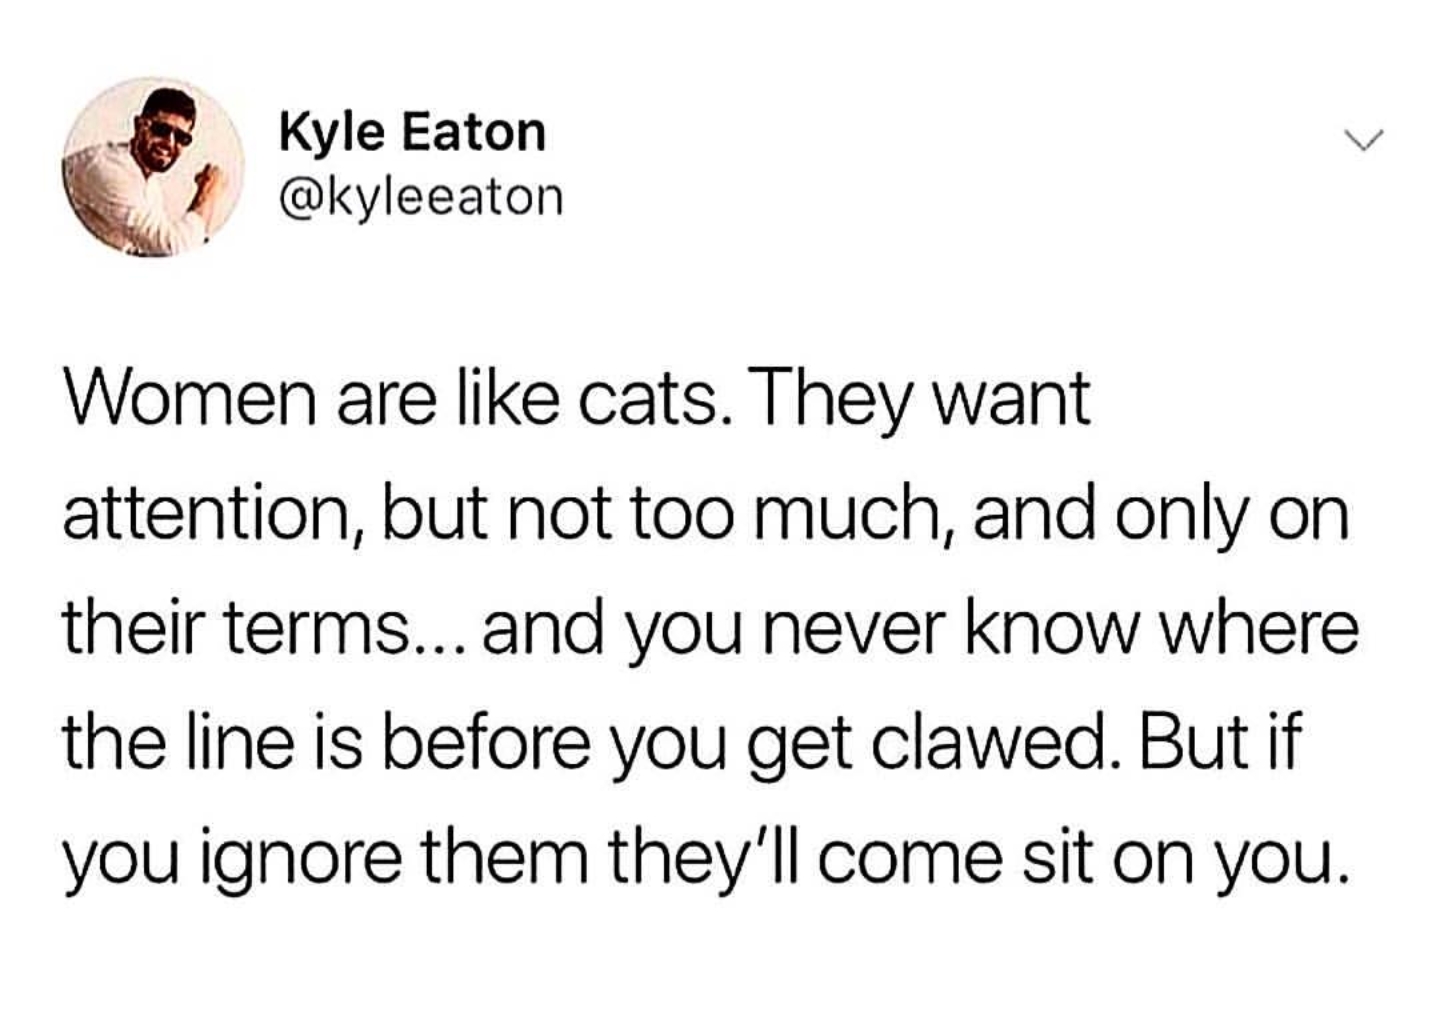 animal - Kyle Eaton Women are cats. They want attention, but not too much, and only on their terms... and you never know where the line is before you get clawed. But if you ignore them they'll come sit on you.